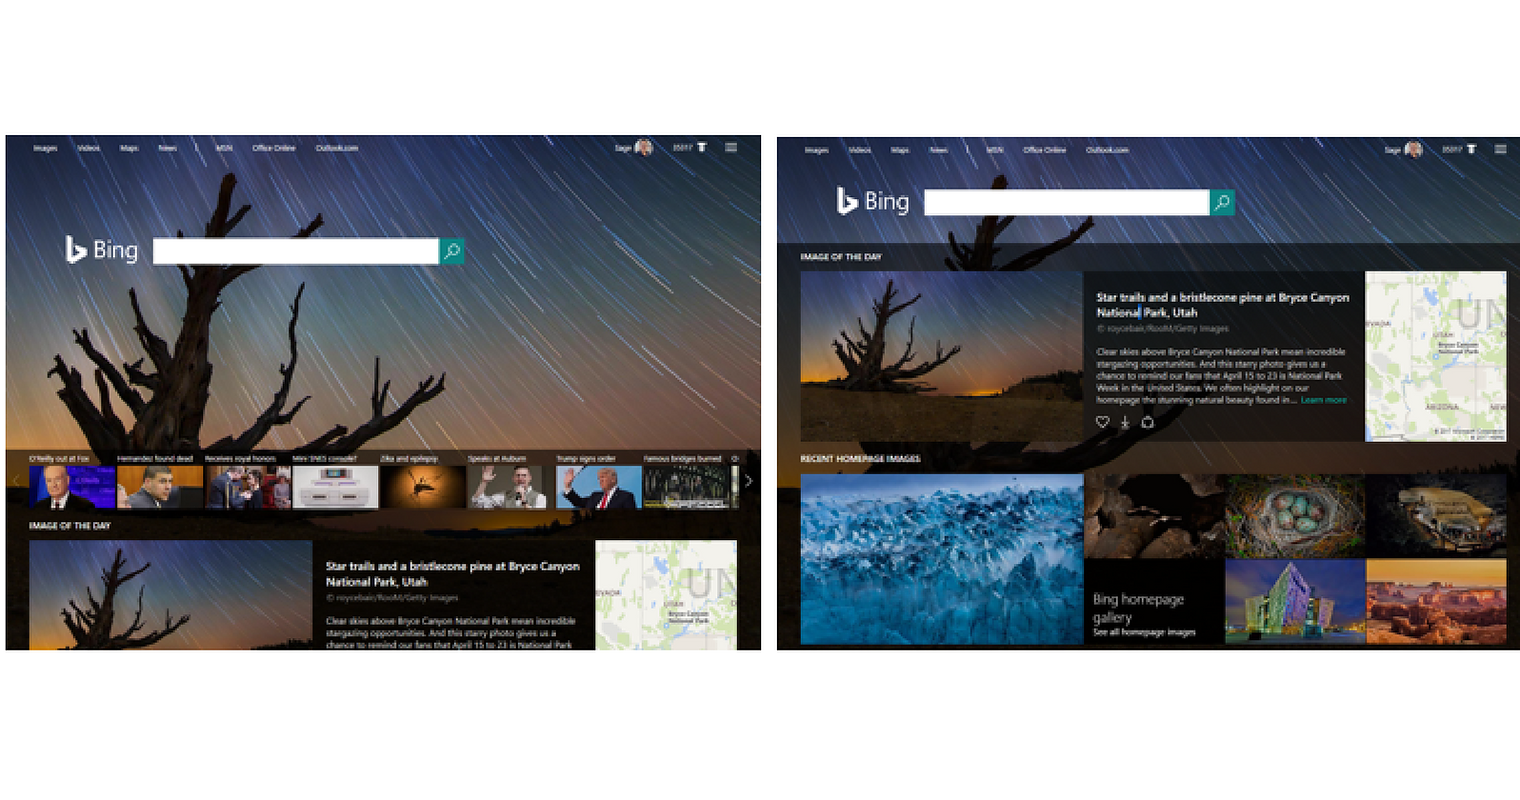 Bing to Explain the Meaning Behind Its Home Page Images